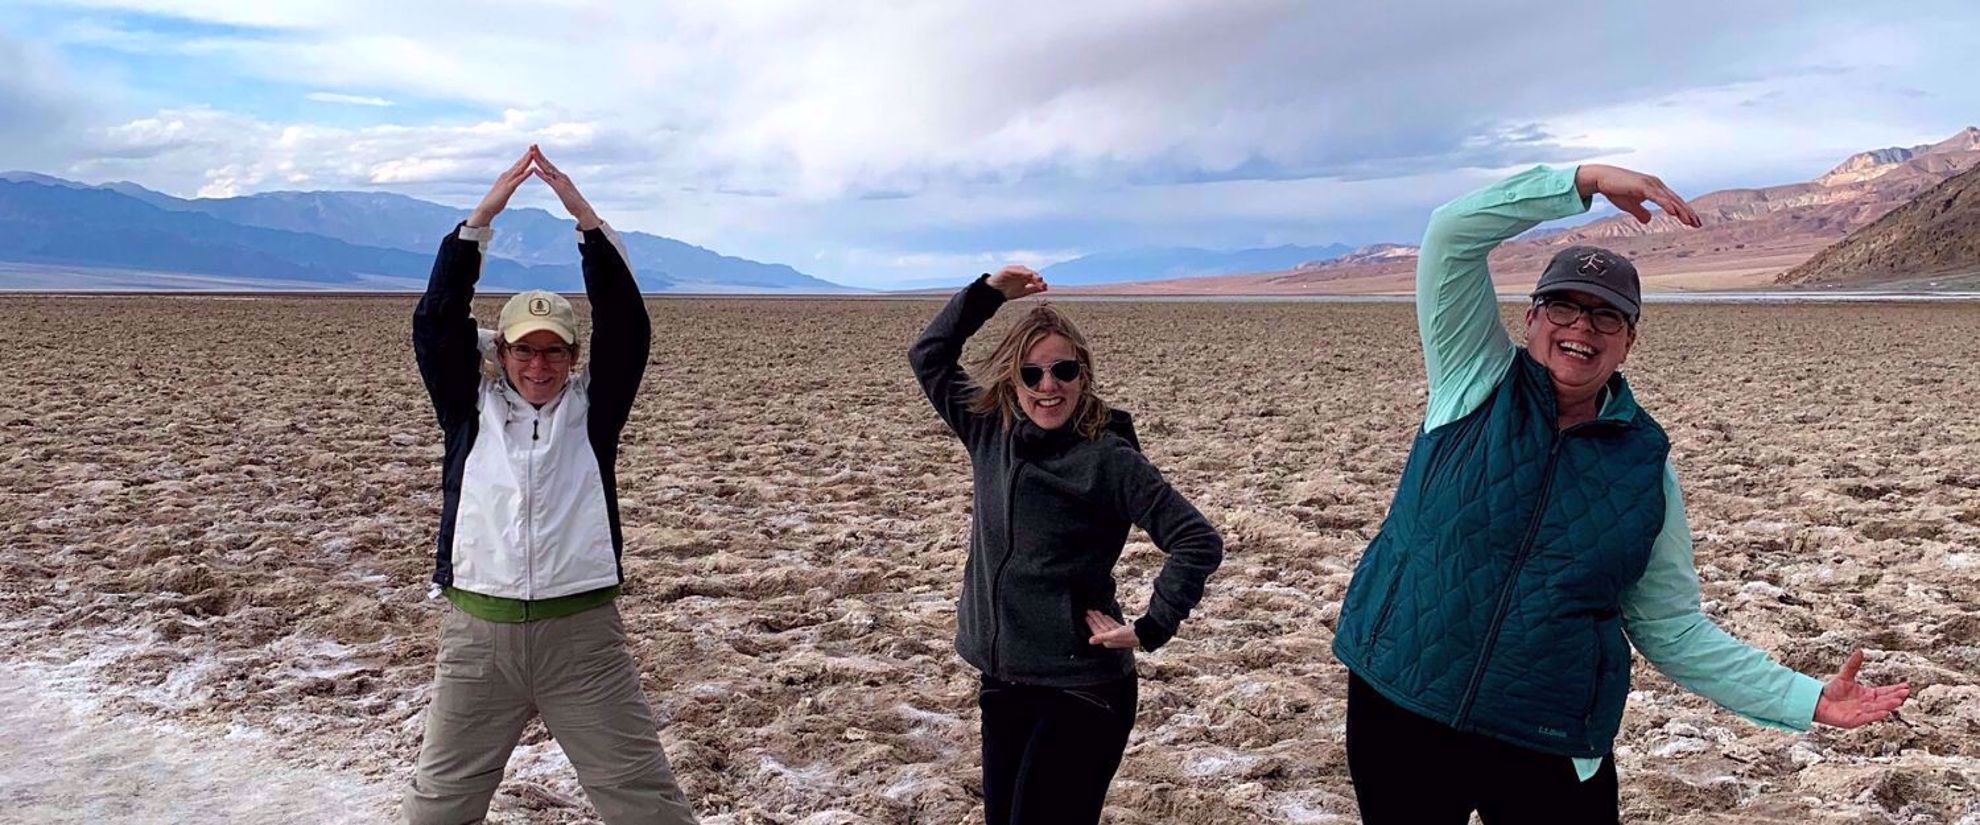 women spelling out AGC with their arms in death valley